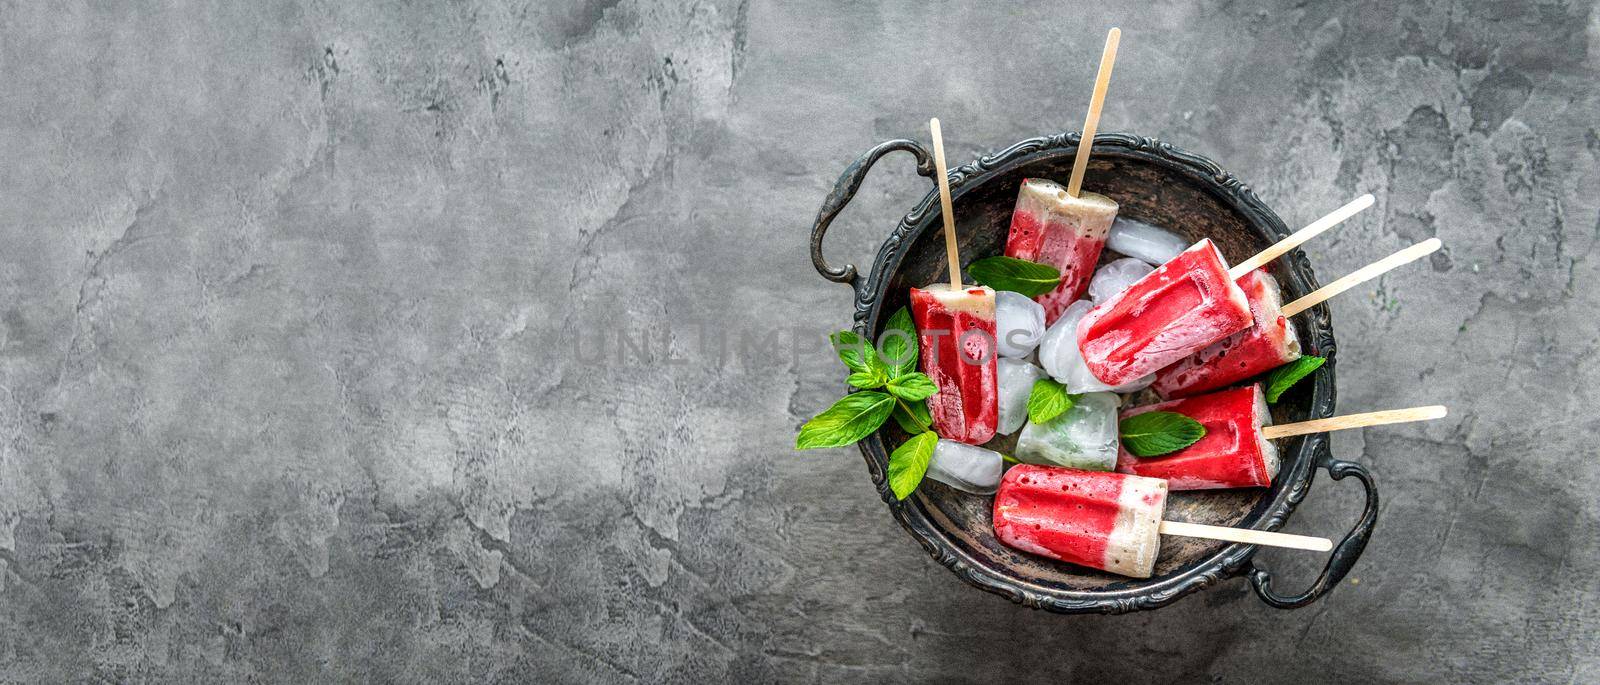 Delicious homemade ice cream with bananas and strawberries served with ice and mint leaves, topview